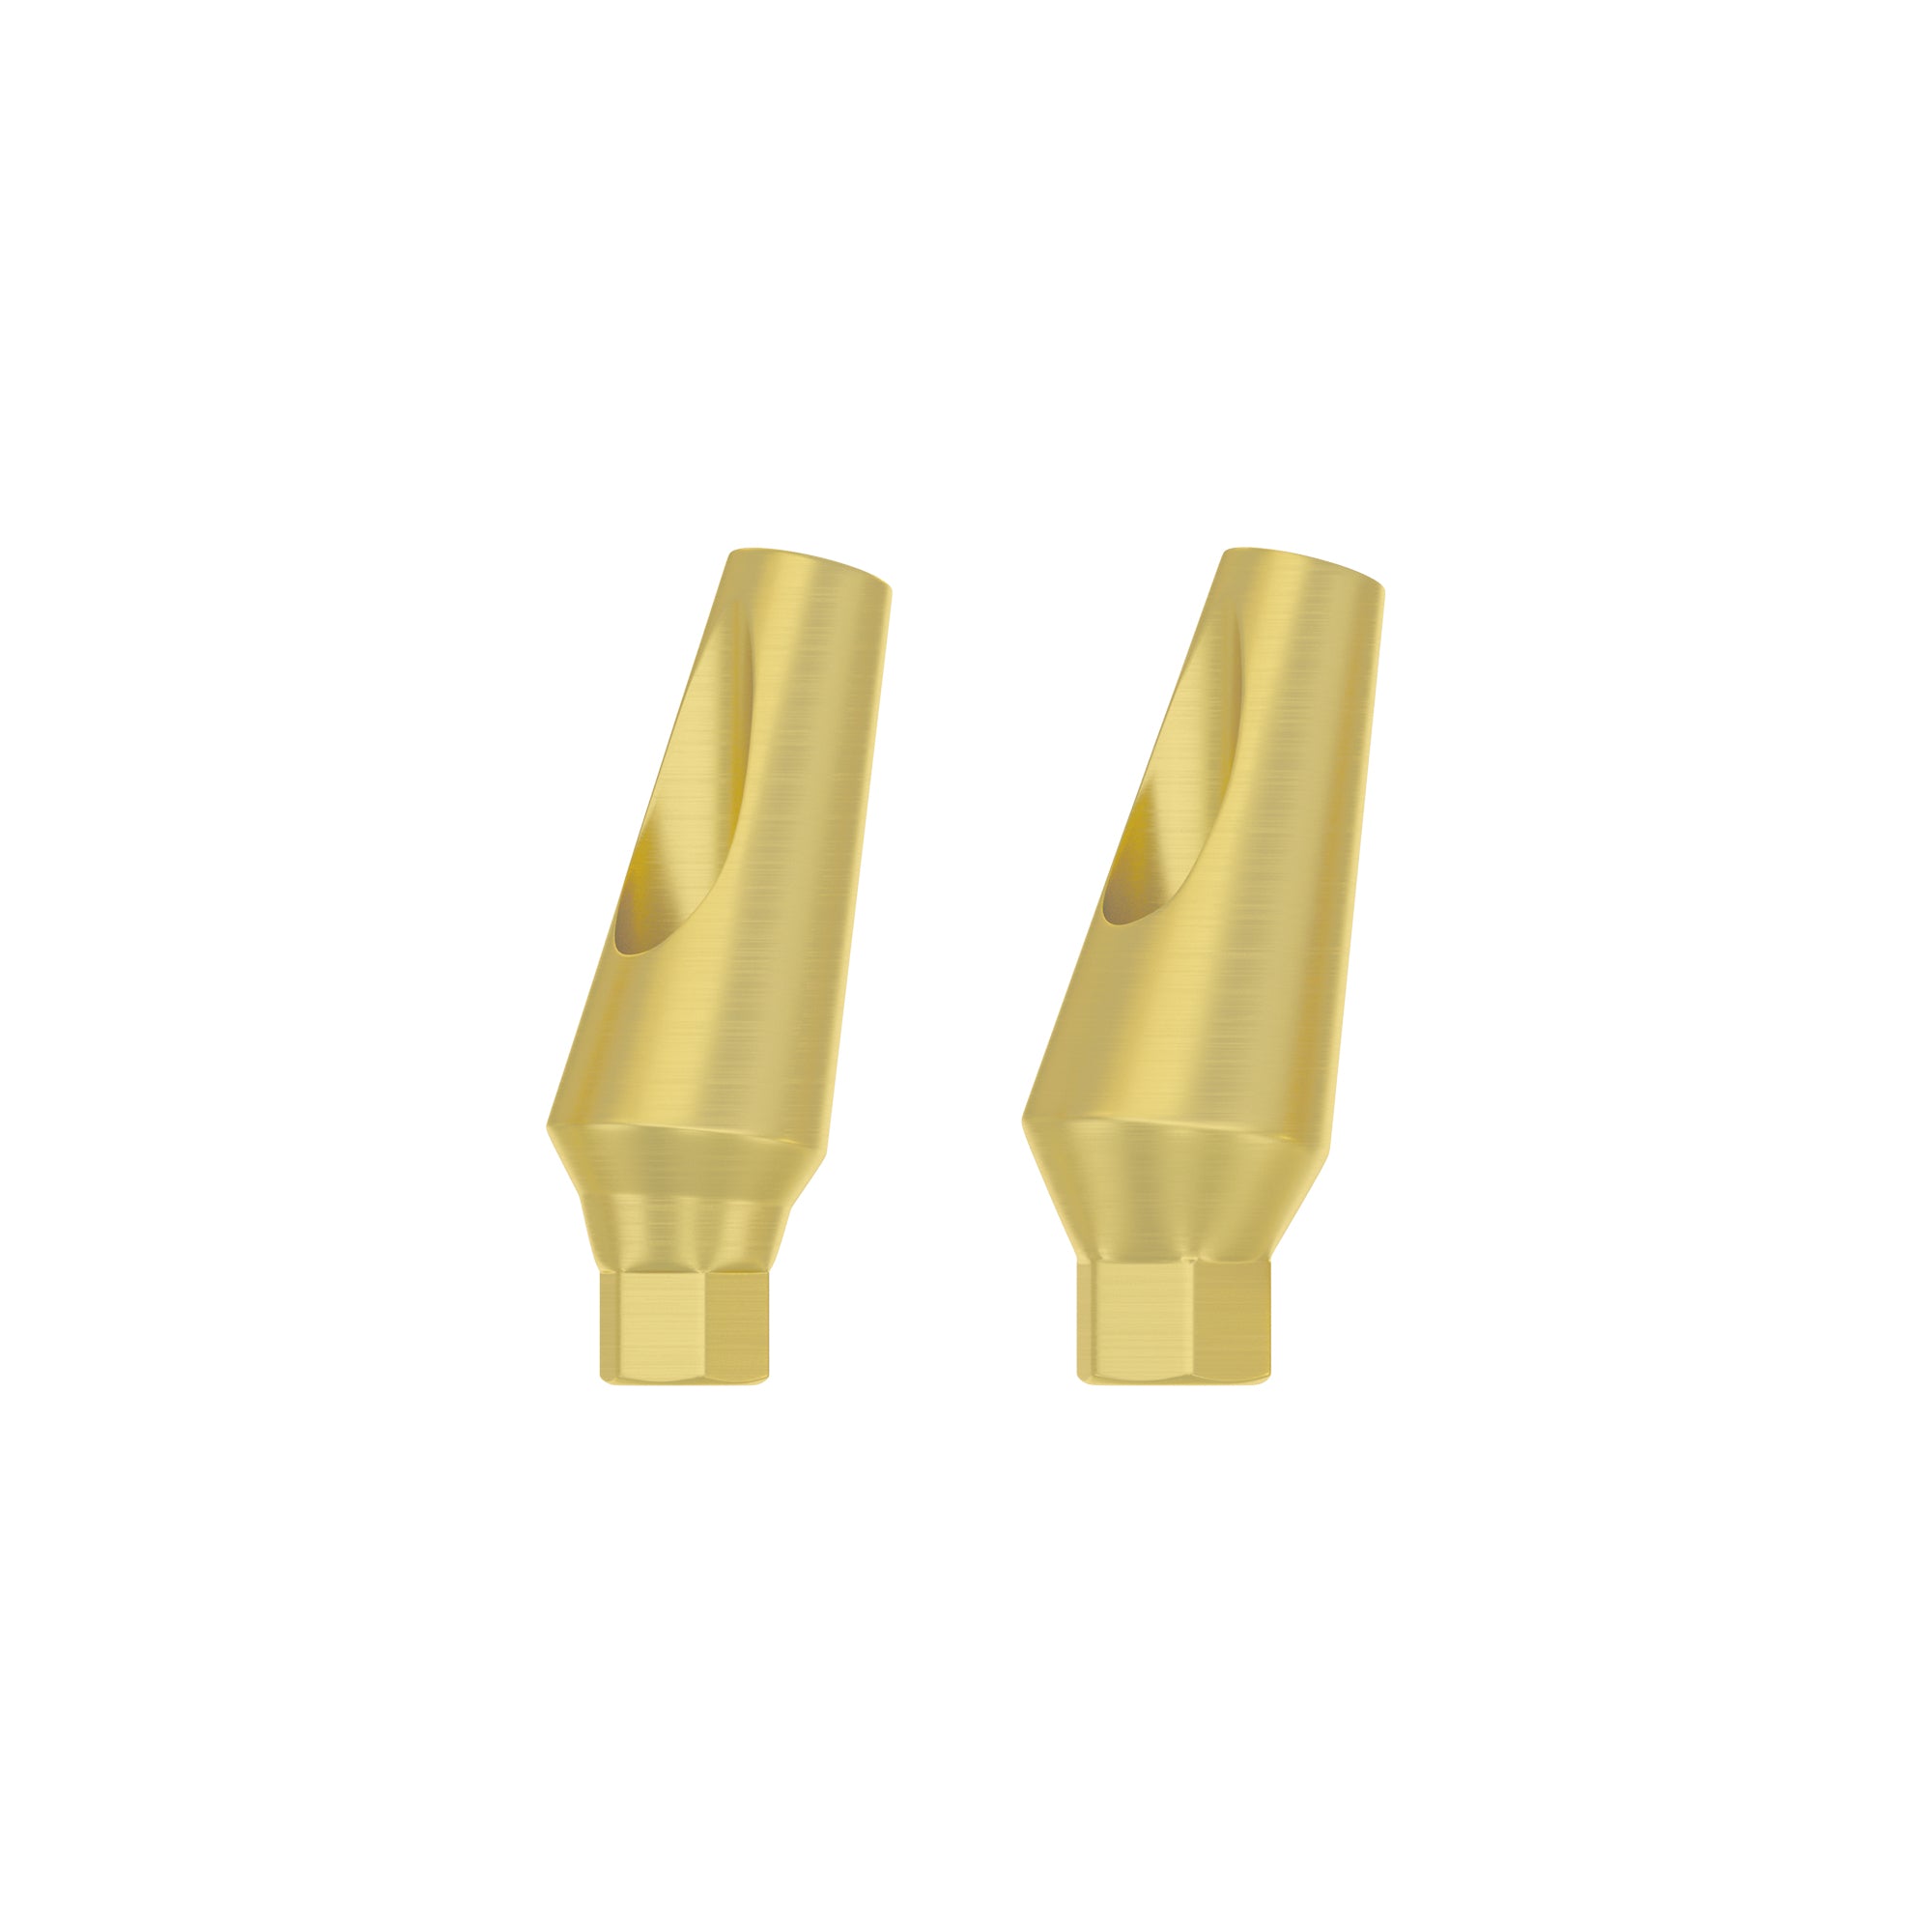 DSI Angulated 15° Regular Abutment 3.6mm - Conical Connection NP Ø3.5mm